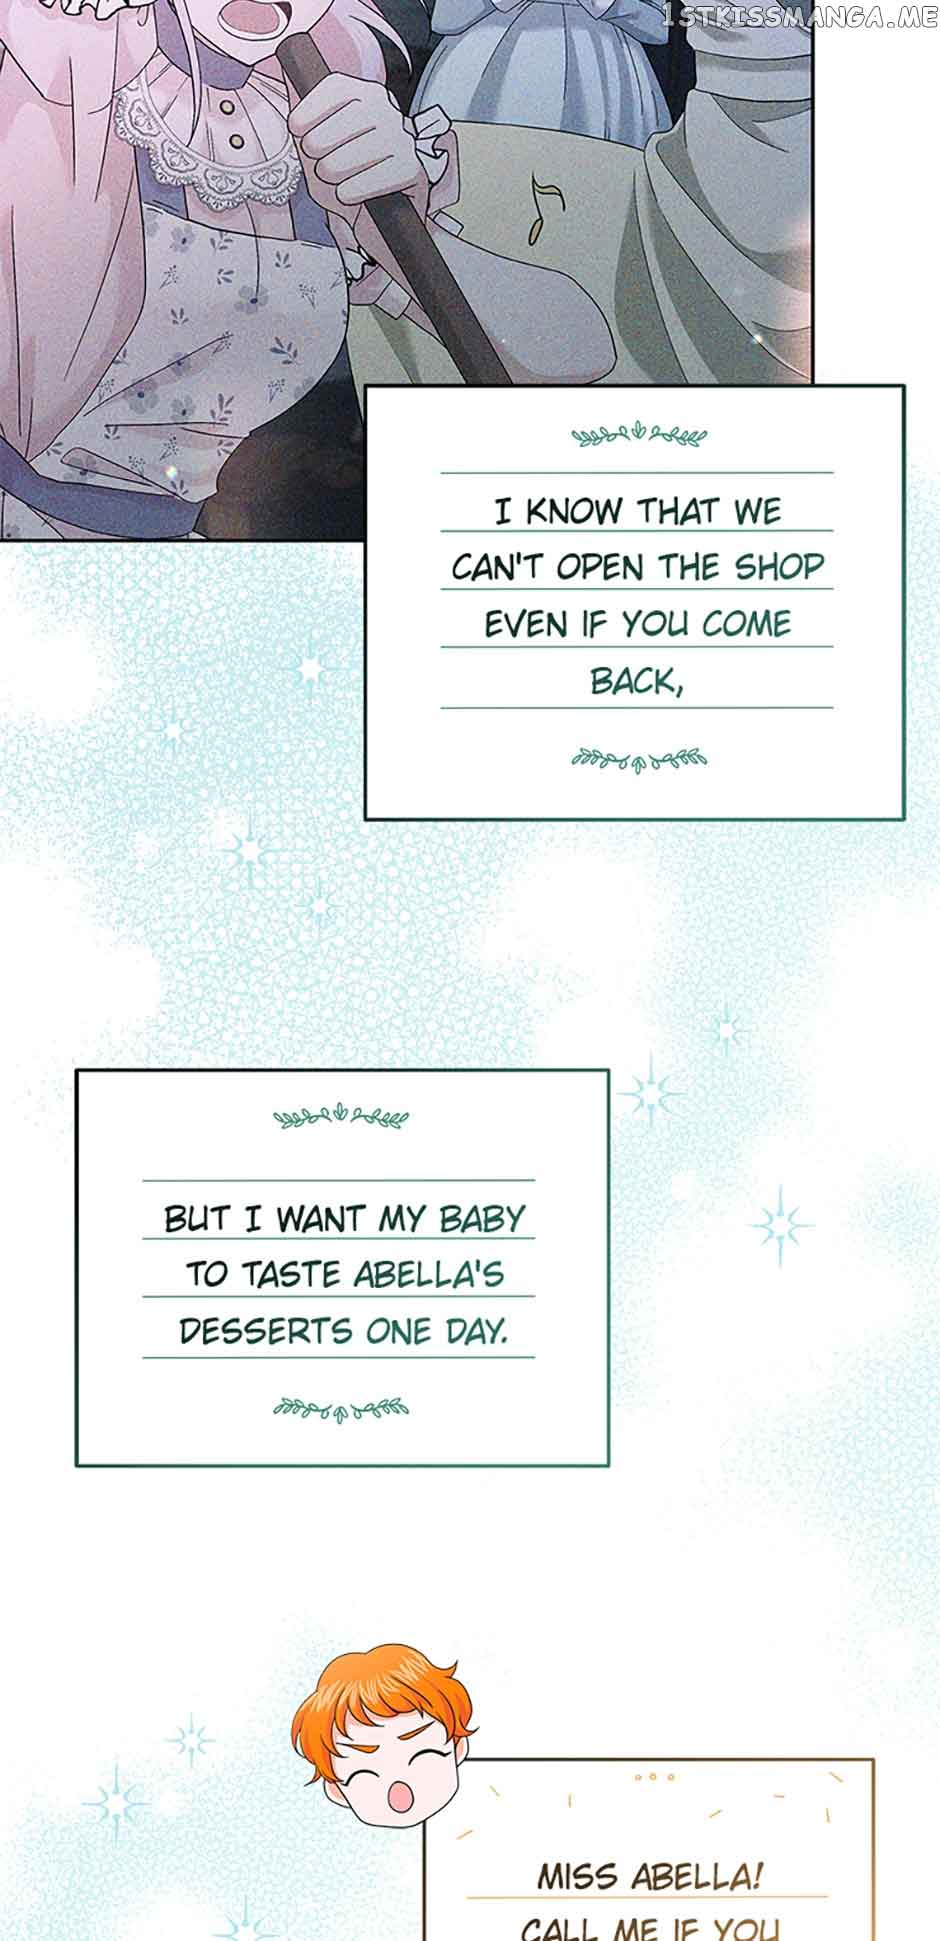 She came back and opened a dessert shop chapter 50